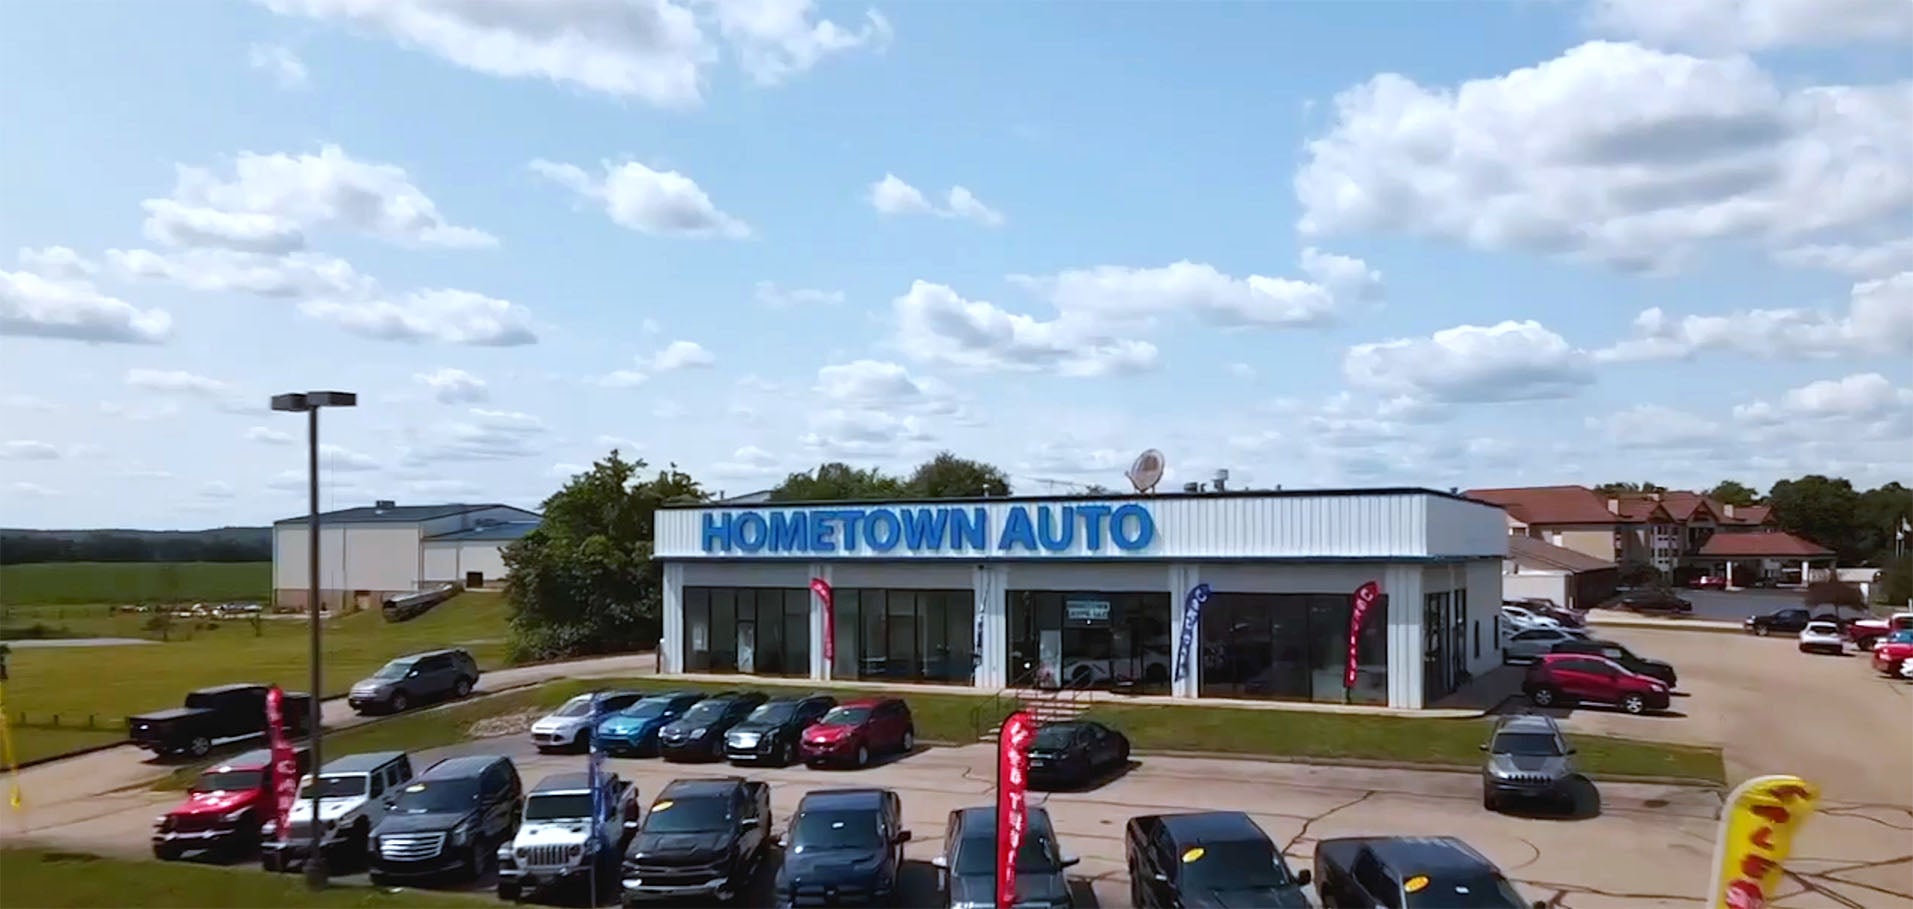 Our dealership lot in Chillicothe, OH